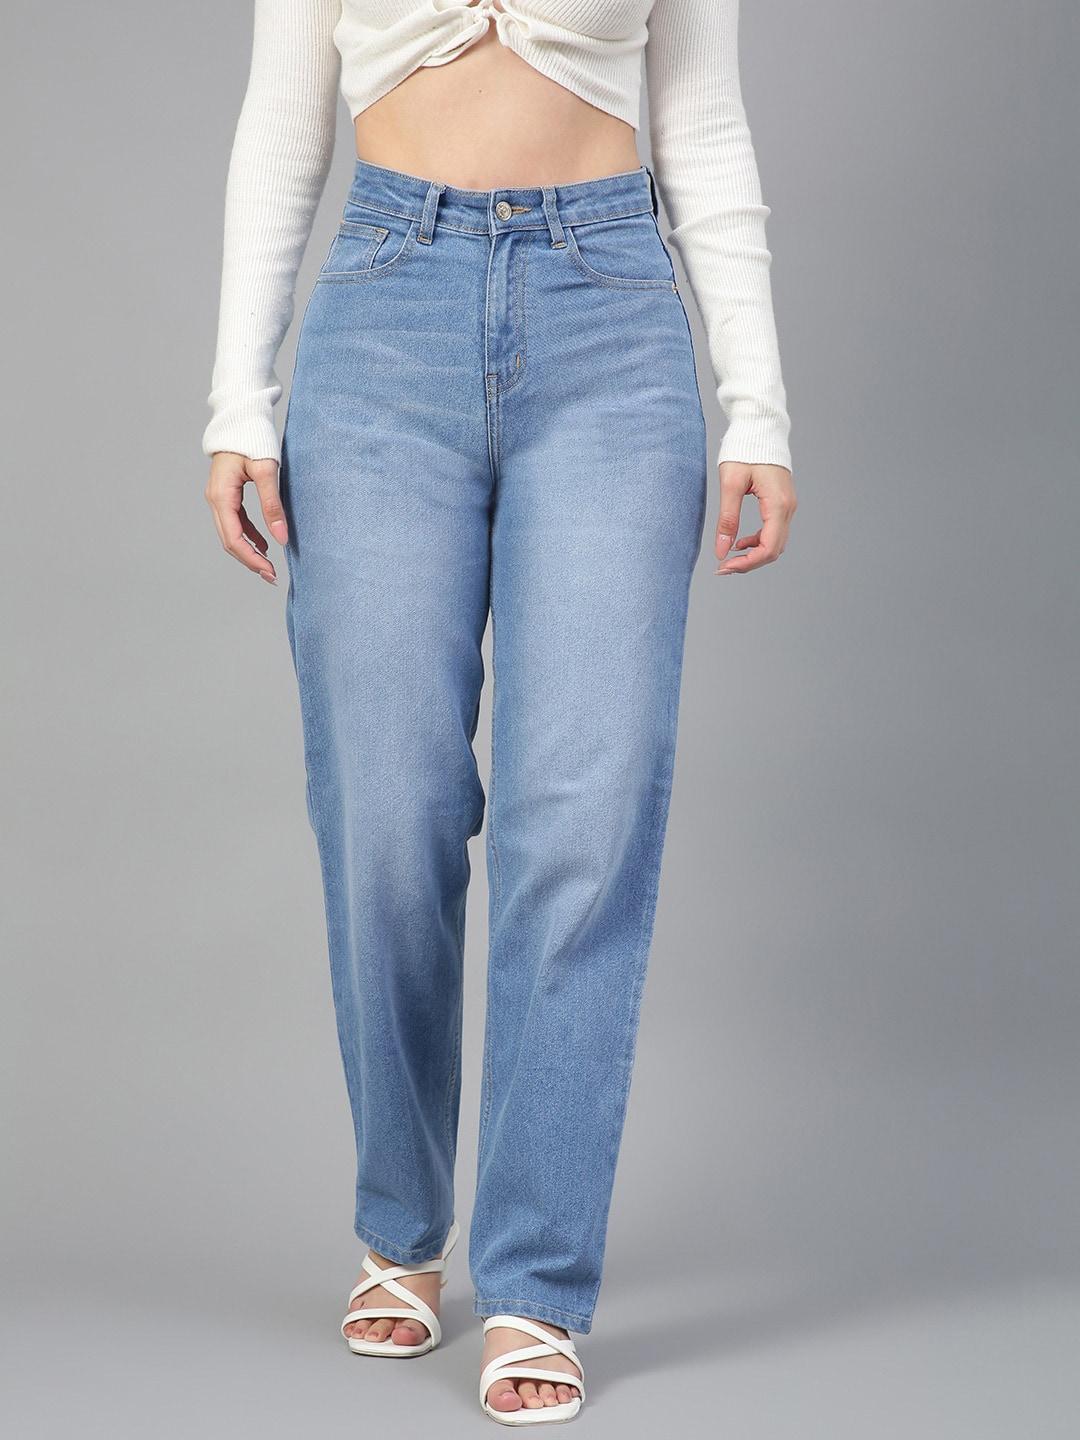 kotty-women-jean-straight-fit-high-rise-light-fade-stretchable-jeans